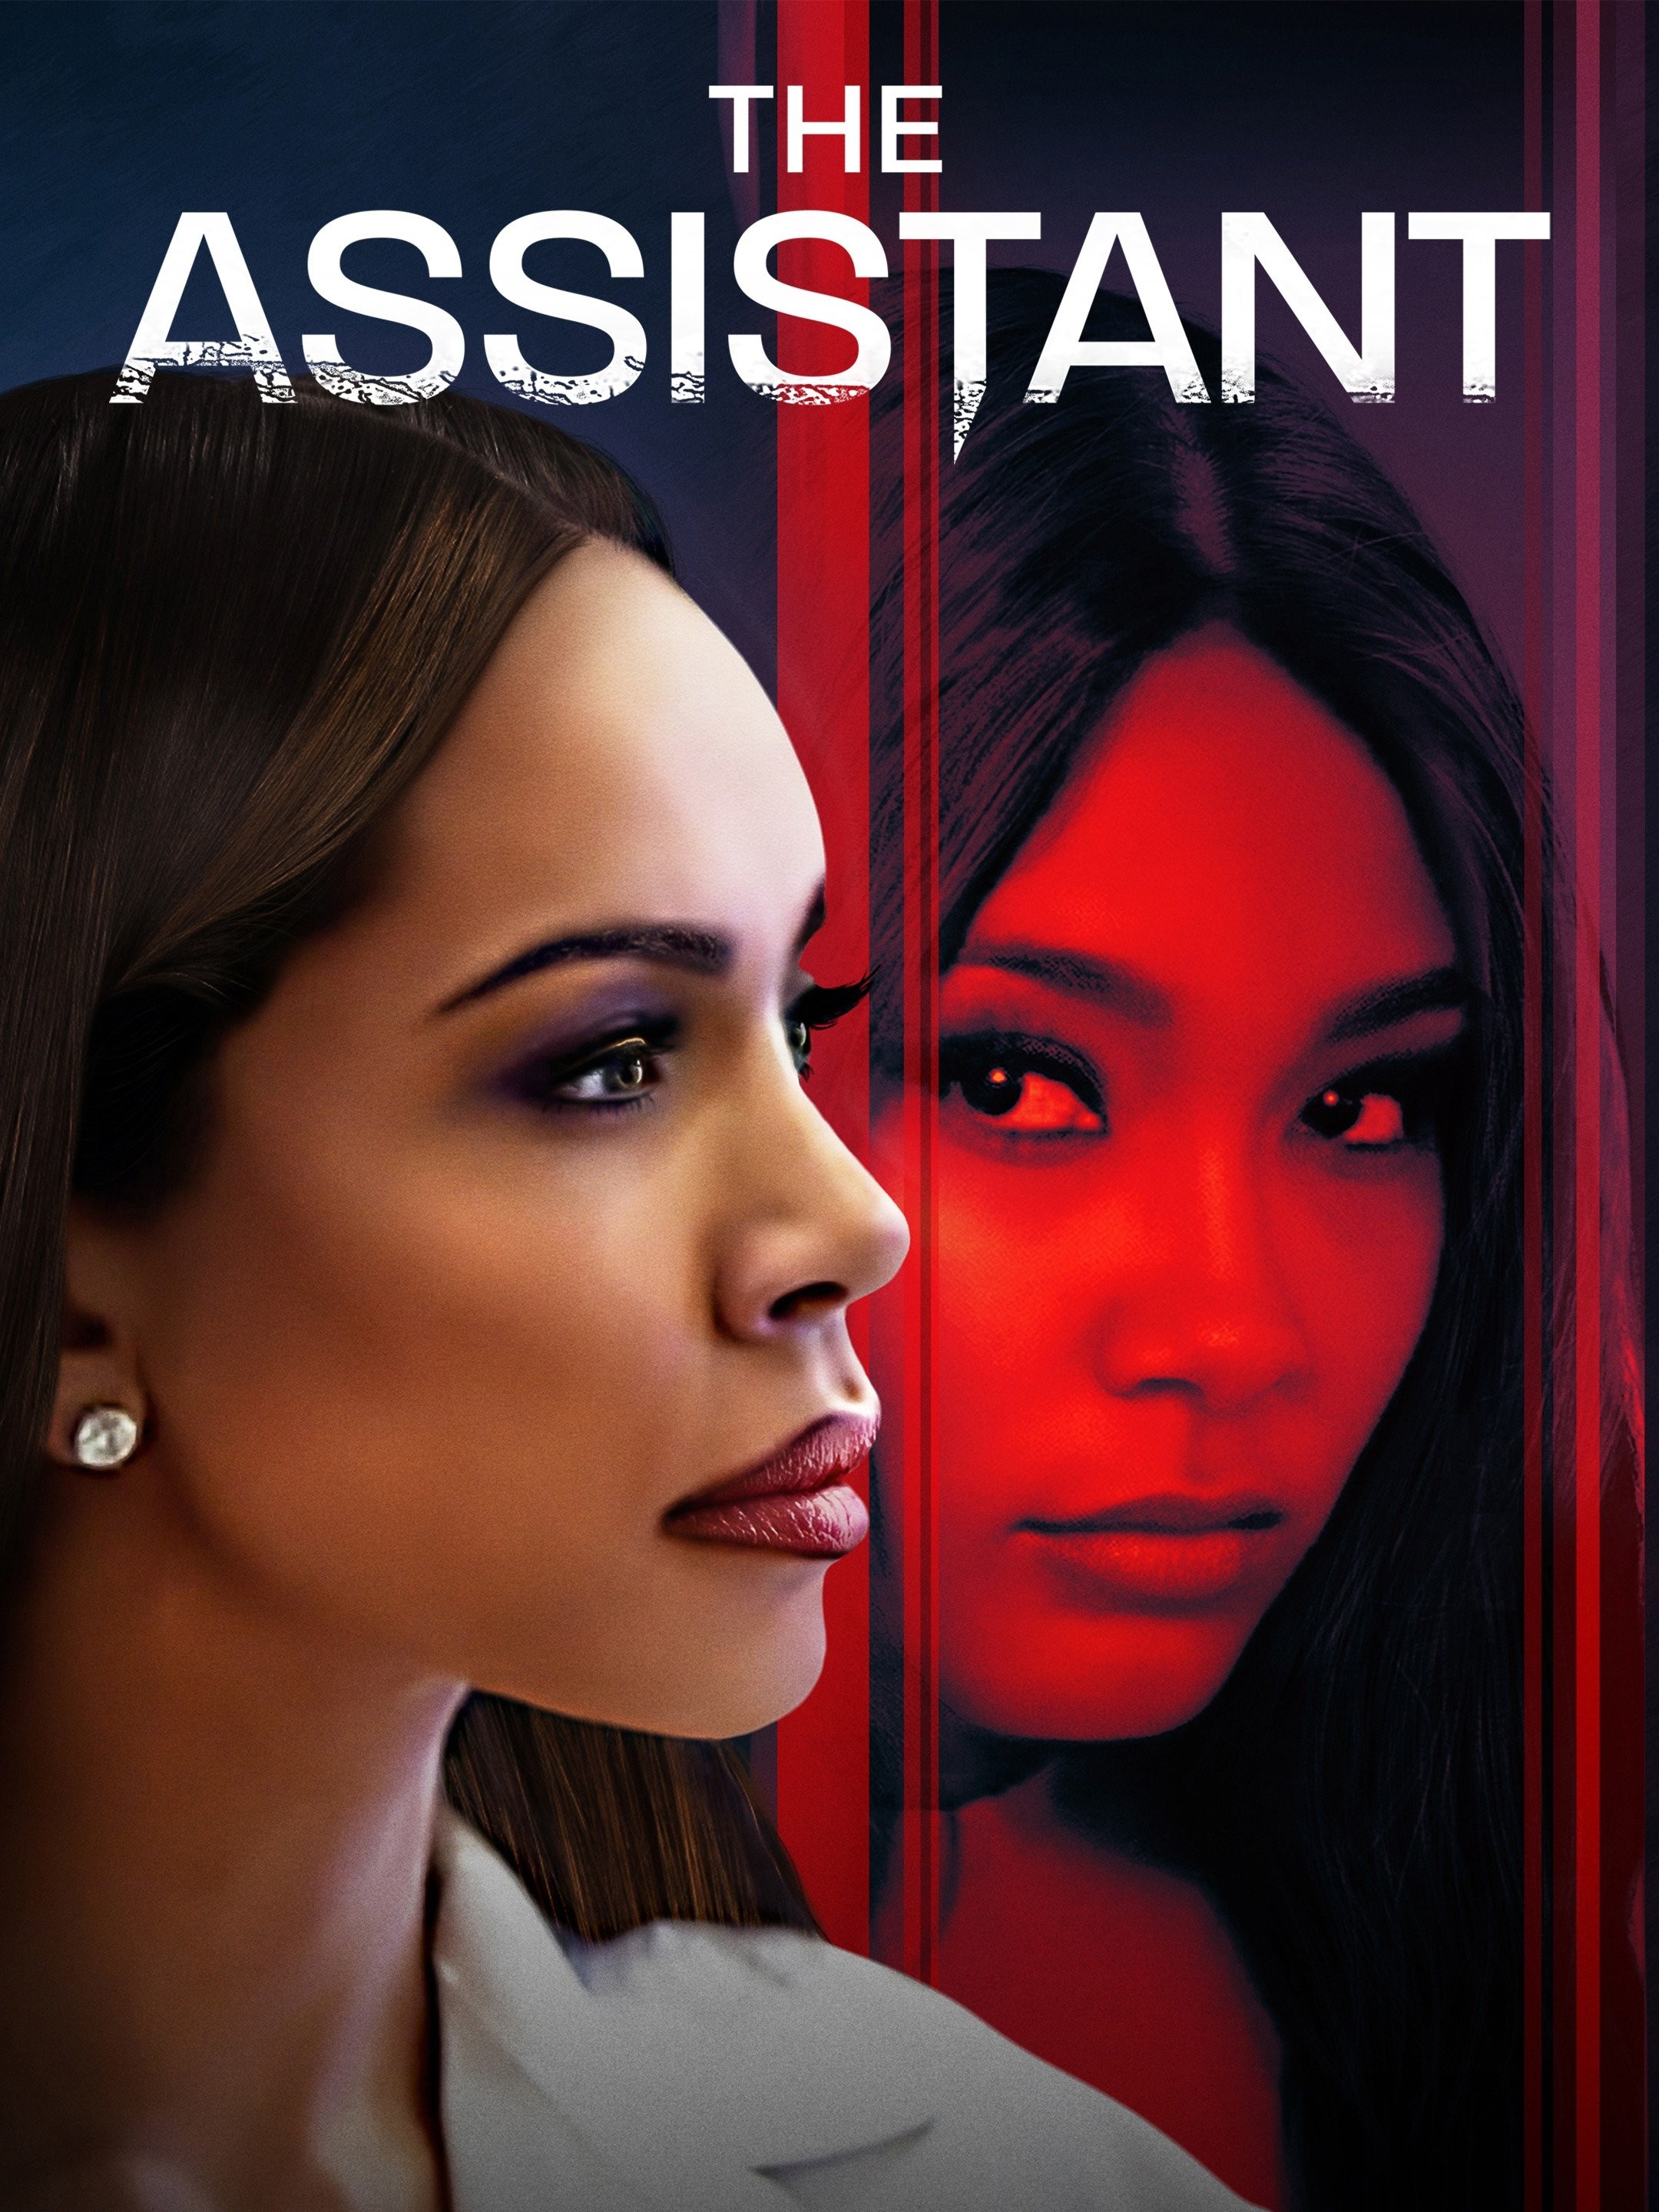 The assistant with erica mena